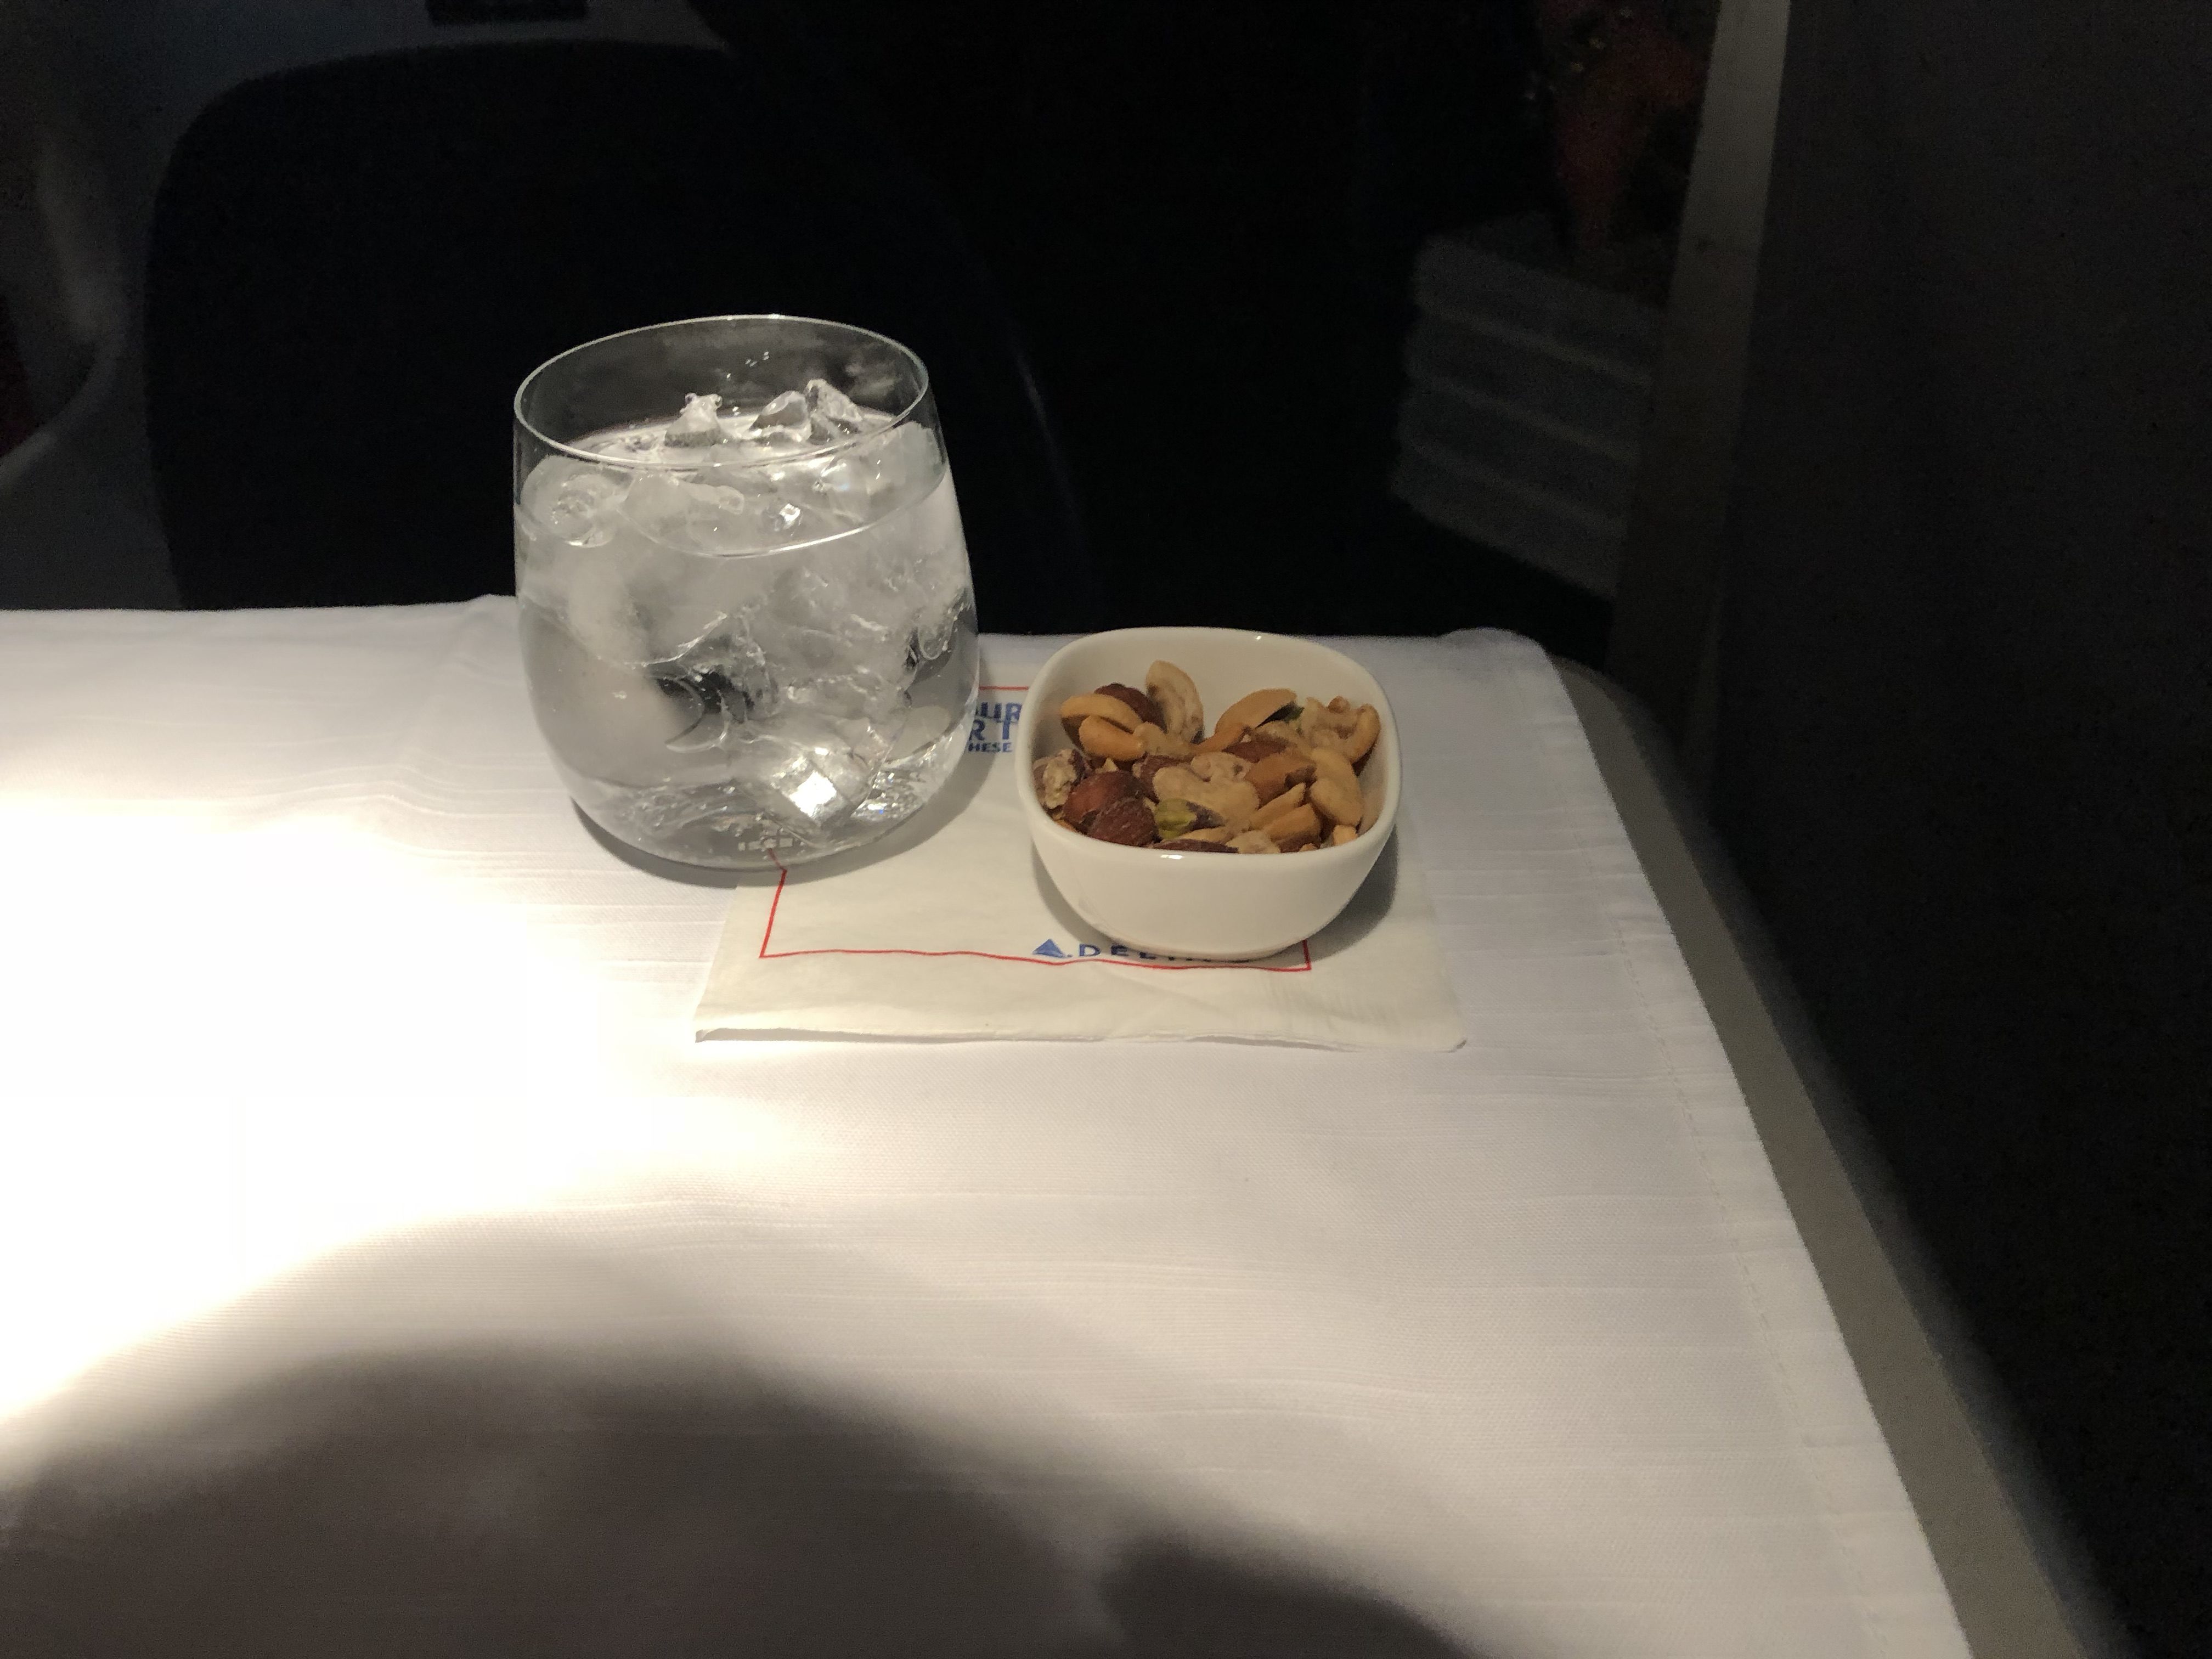 Delta One beverage service with nuts, Sydney to Los Angeles